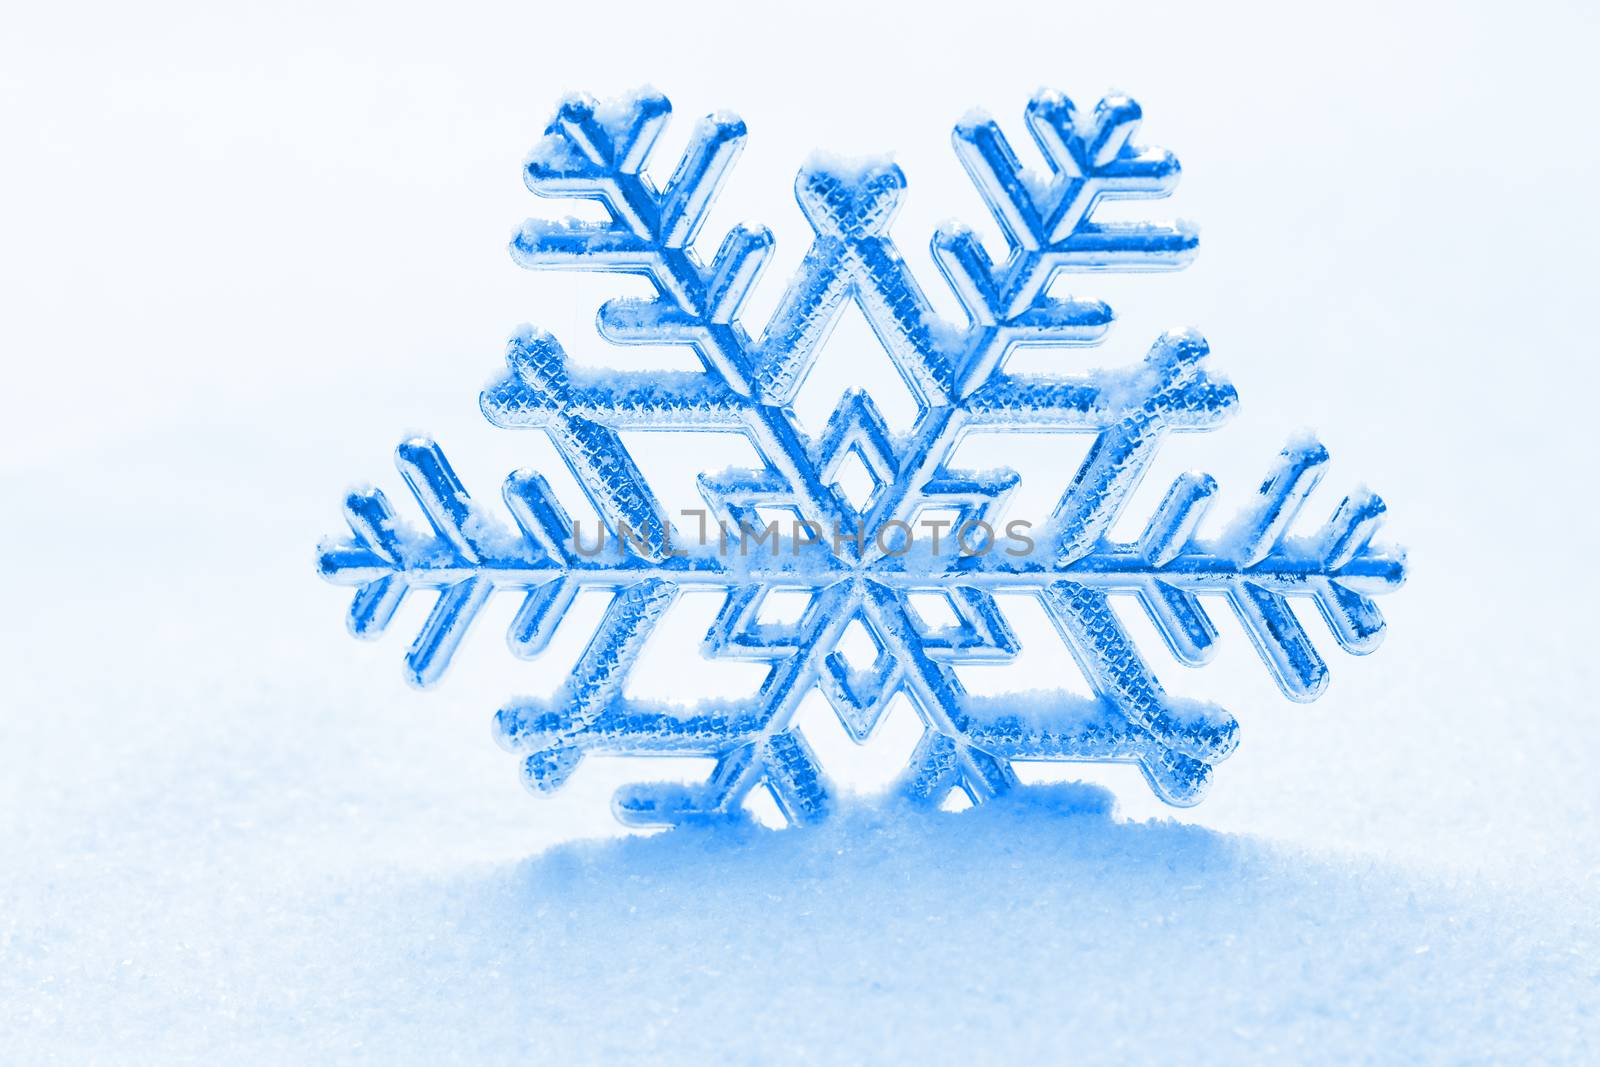 snowflake against a background of snow by anelina